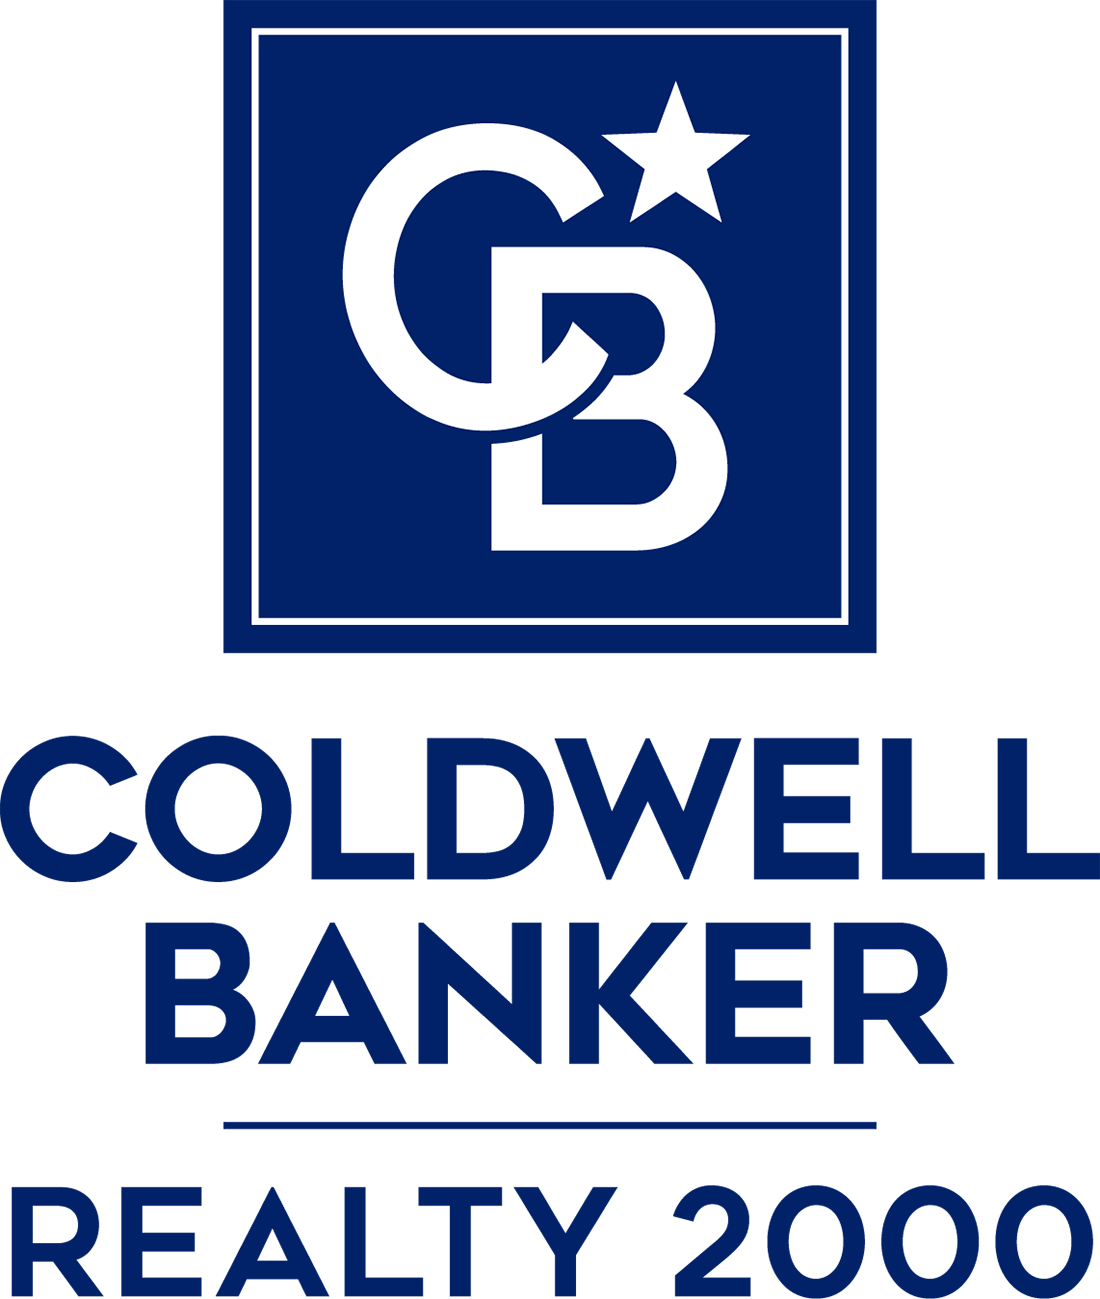 Coldwell Banker Realty 2000